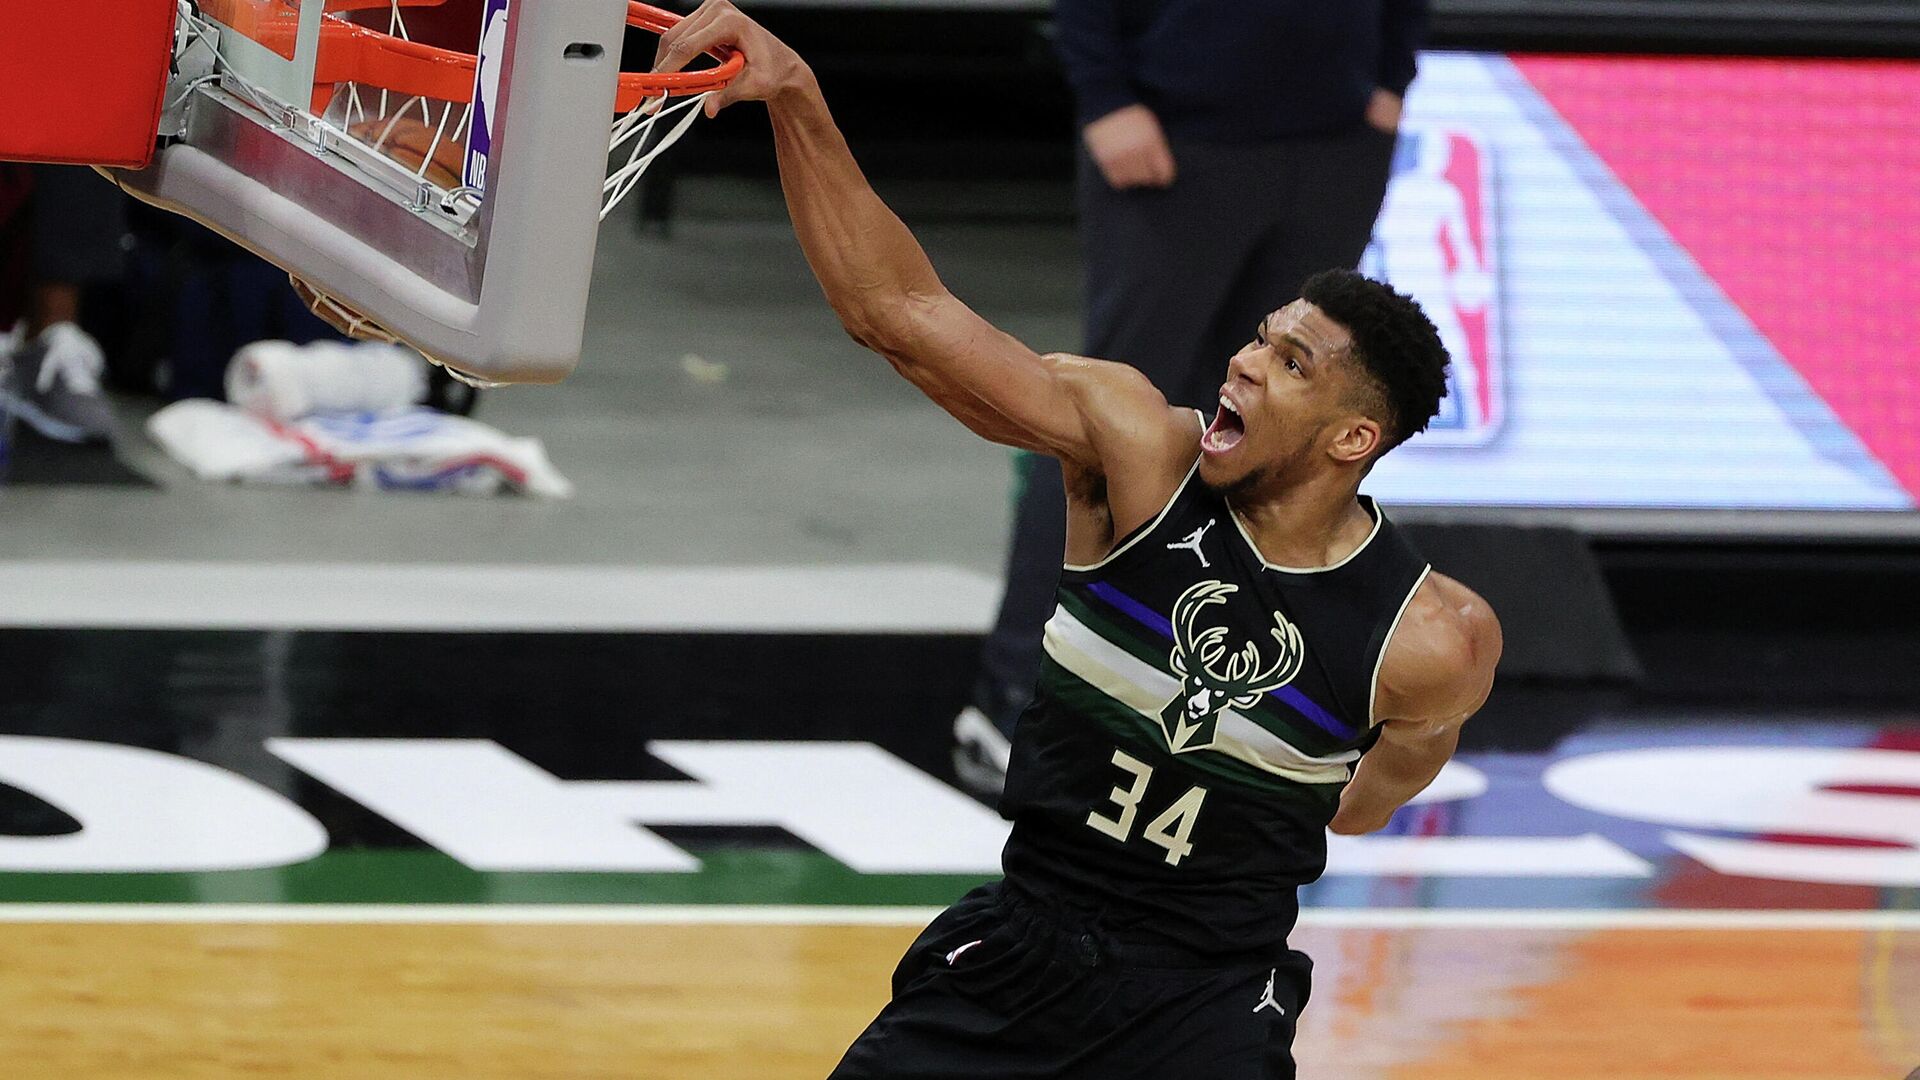 MILWAUKEE, WISCONSIN - FEBRUARY 28: Giannis Antetokounmpo #34 of the Milwaukee Bucks dunks during the second half of a game against the LA Clippers at Fiserv Forum on February 28, 2021 in Milwaukee, Wisconsin. NOTE TO USER: User expressly acknowledges and agrees that, by downloading and or using this photograph, User is consenting to the terms and conditions of the Getty Images License Agreement.   Stacy Revere/Getty Images/AFP (Photo by Stacy Revere / GETTY IMAGES NORTH AMERICA / Getty Images via AFP) - РИА Новости, 1920, 02.03.2021